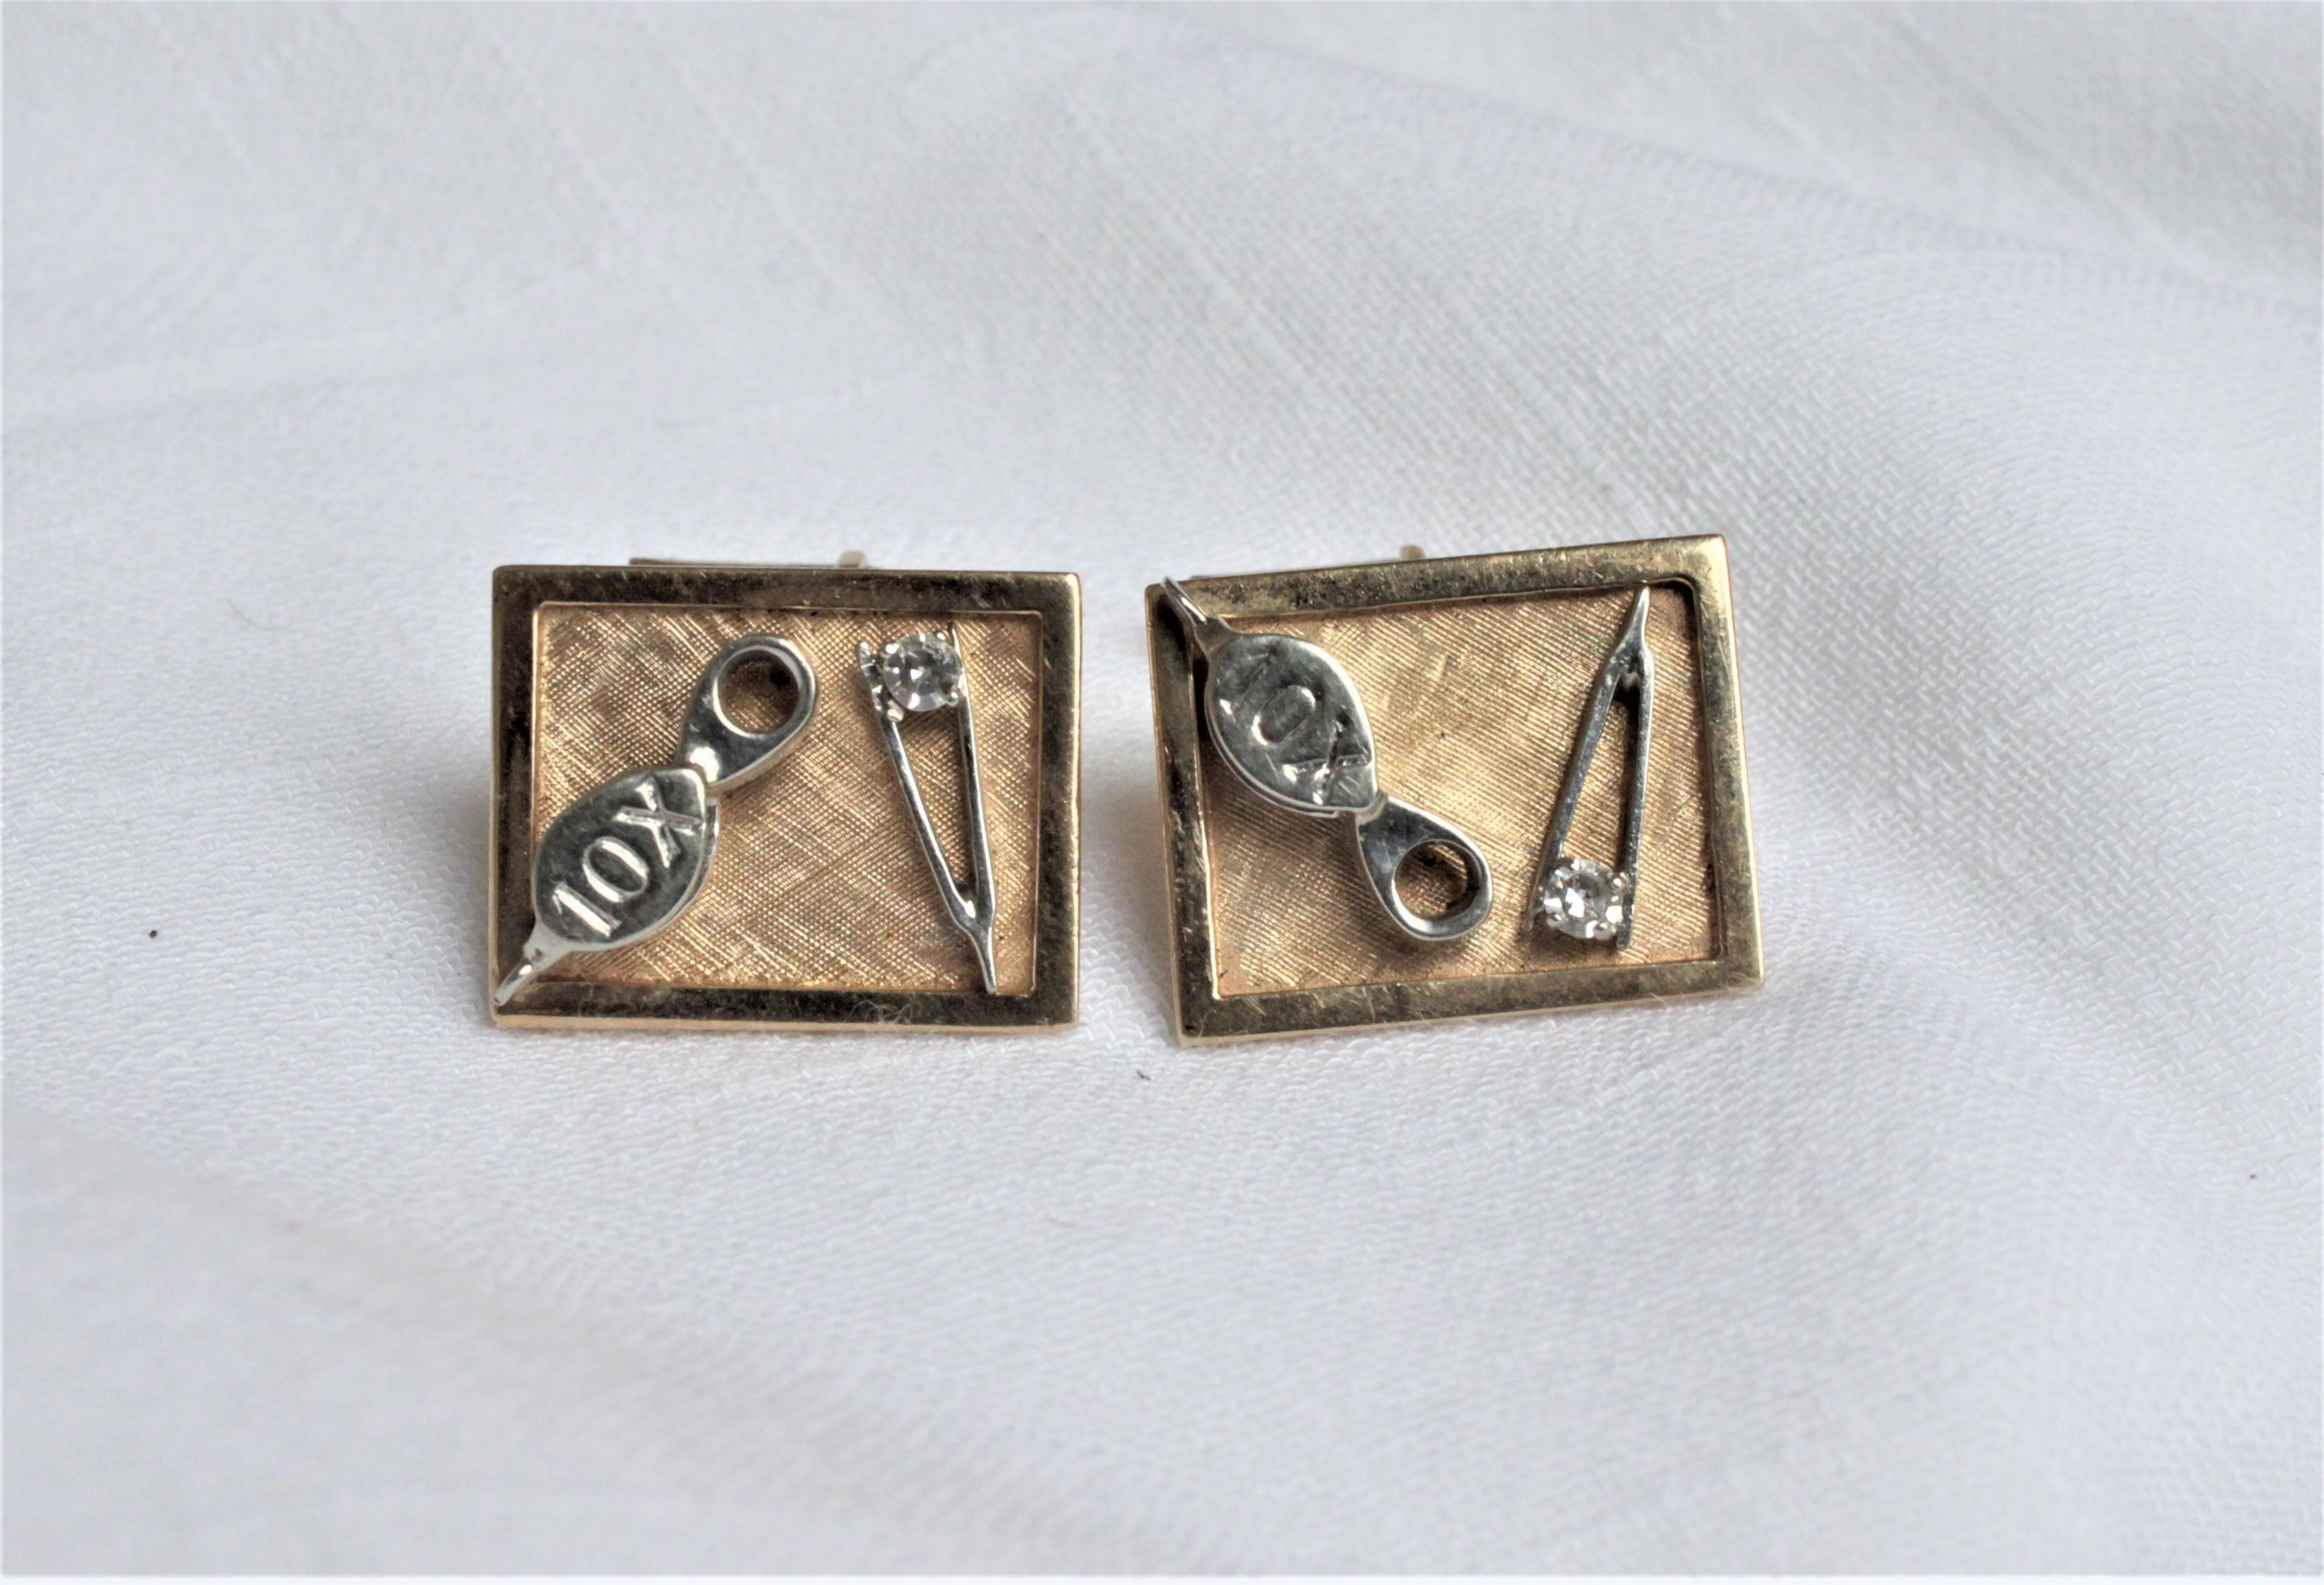 This pair of men’s gold and diamond cufflinks have no maker's marks, but presumed to have been made in the United States in the period and style of Mid-Century Modernism. The cufflinks are composed of solid 14-karat yellow and white gold featuring a